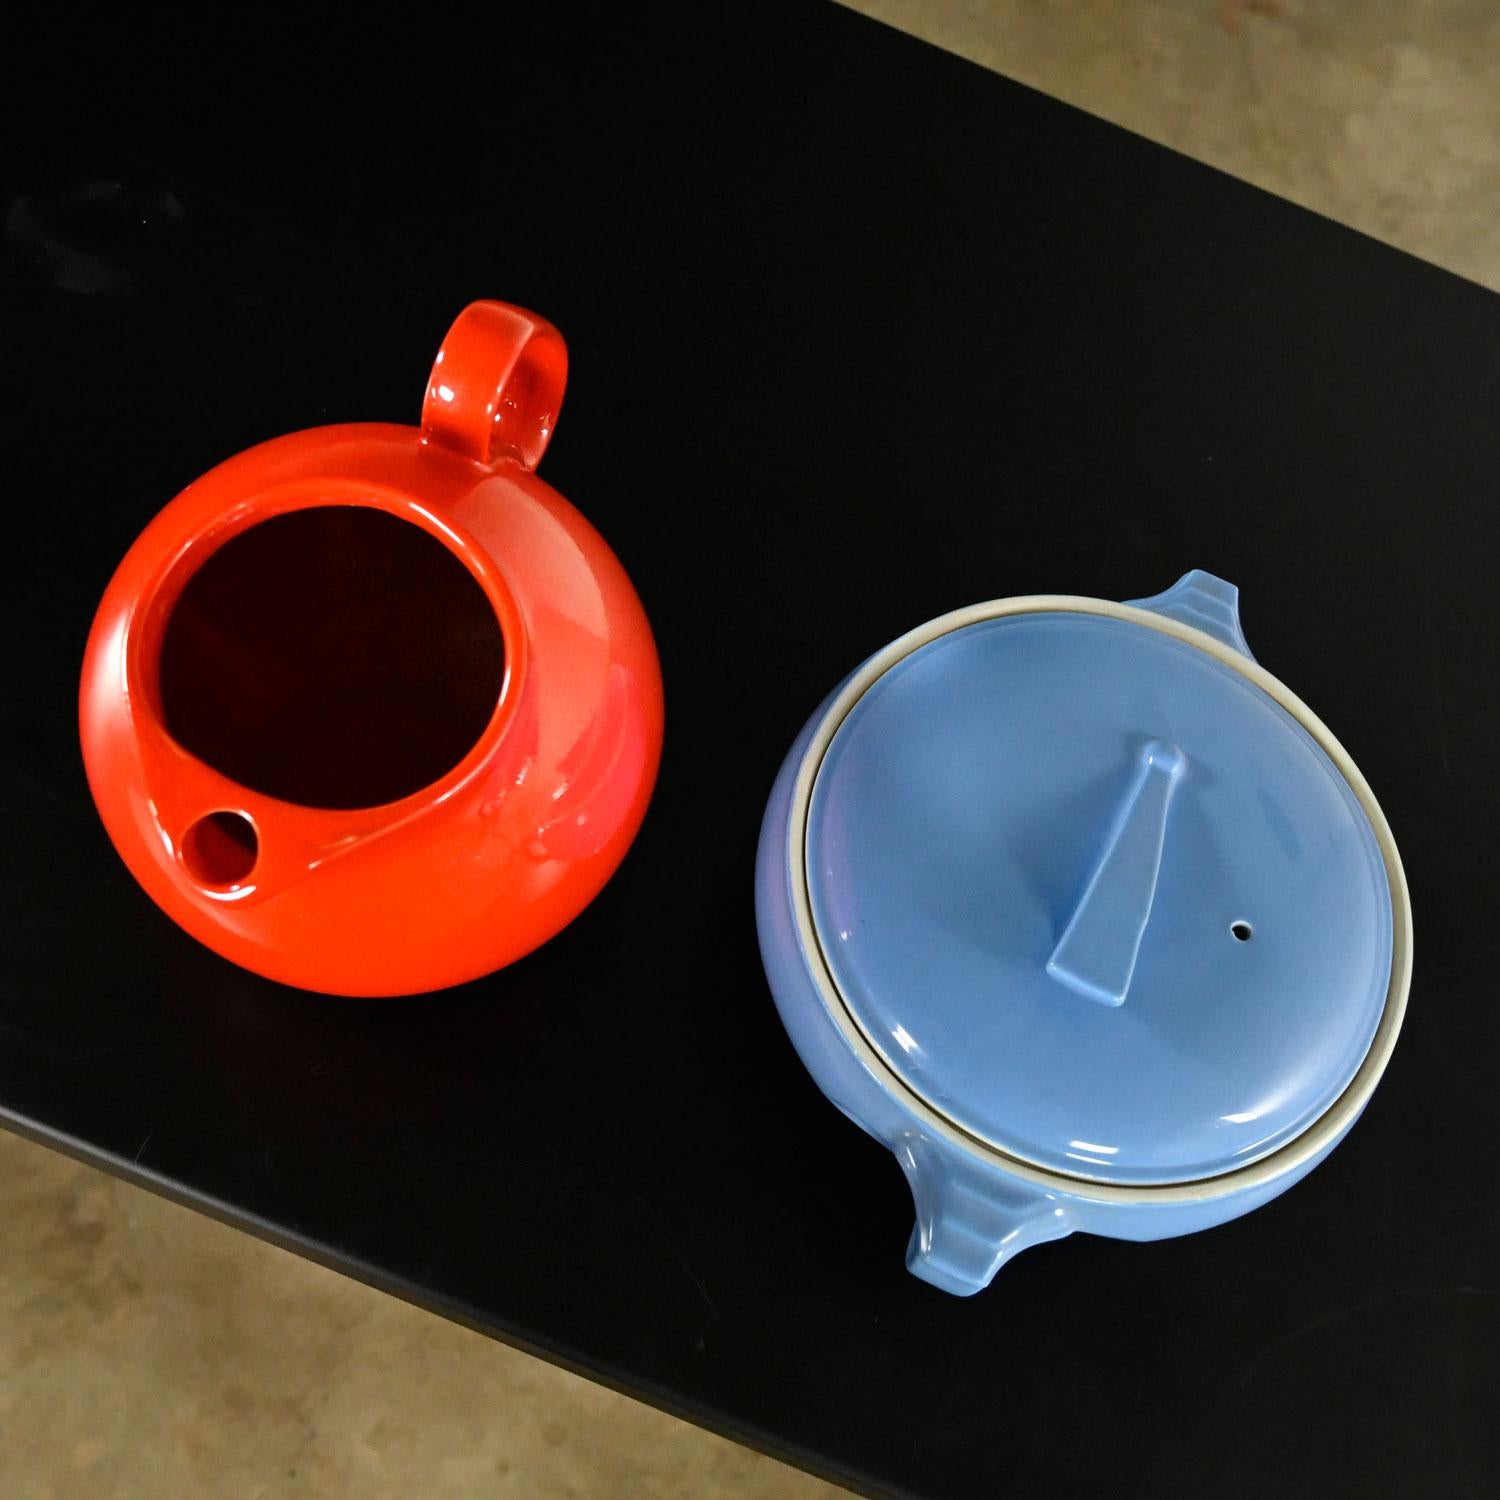 Mid-Century Modern Vintage Red Pitcher by Waechtersbach Germany & Blue Hall Sundial Casserole Dish For Sale